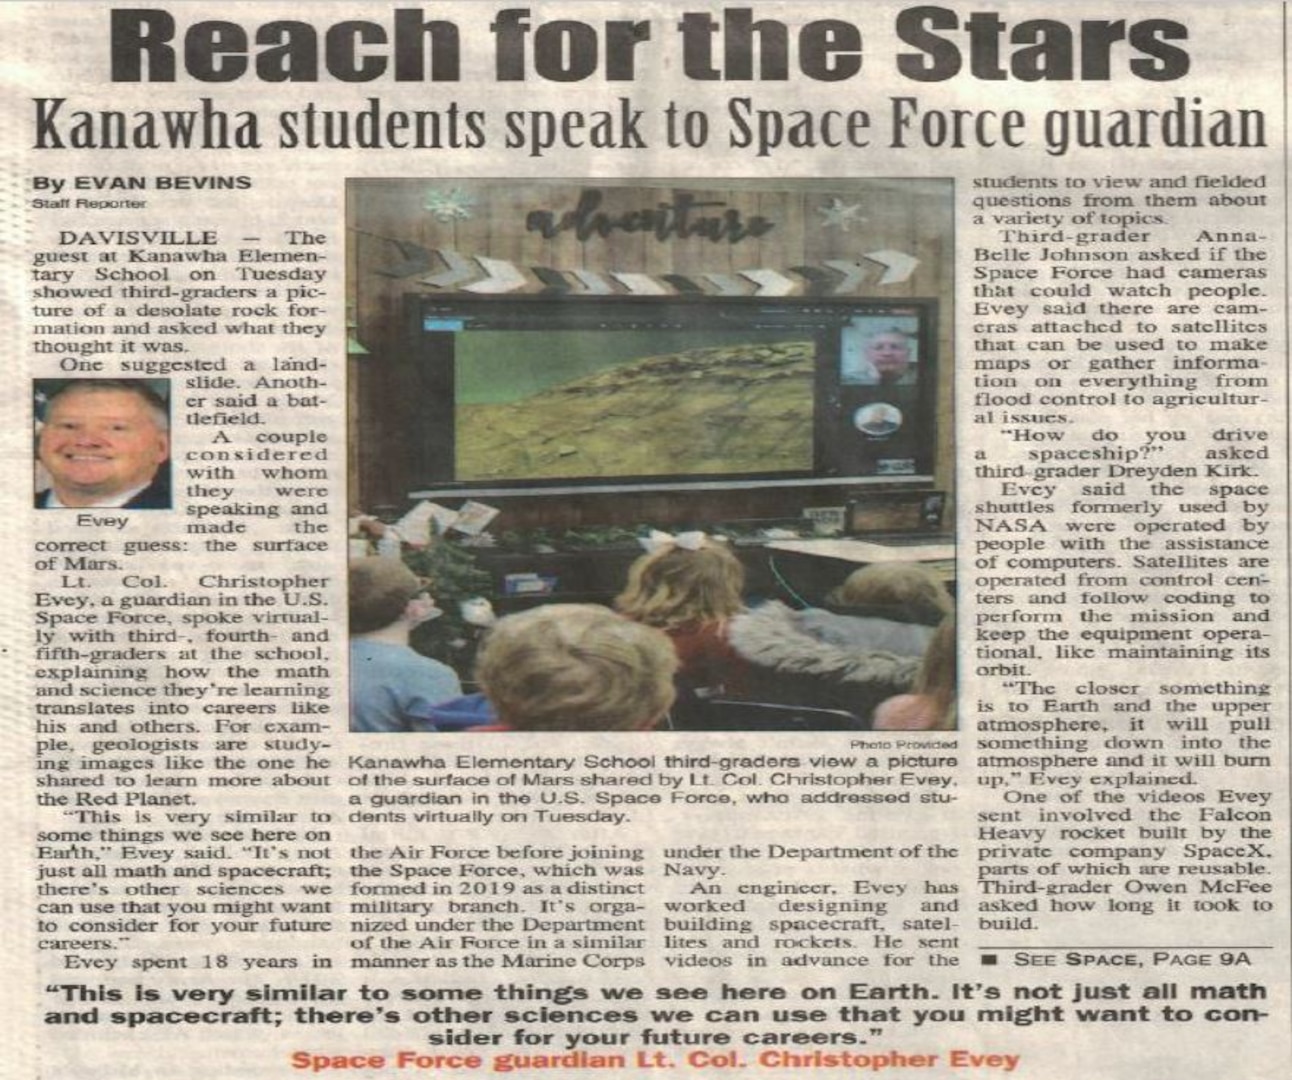 Photo of the news article for the SSG Evey News Story